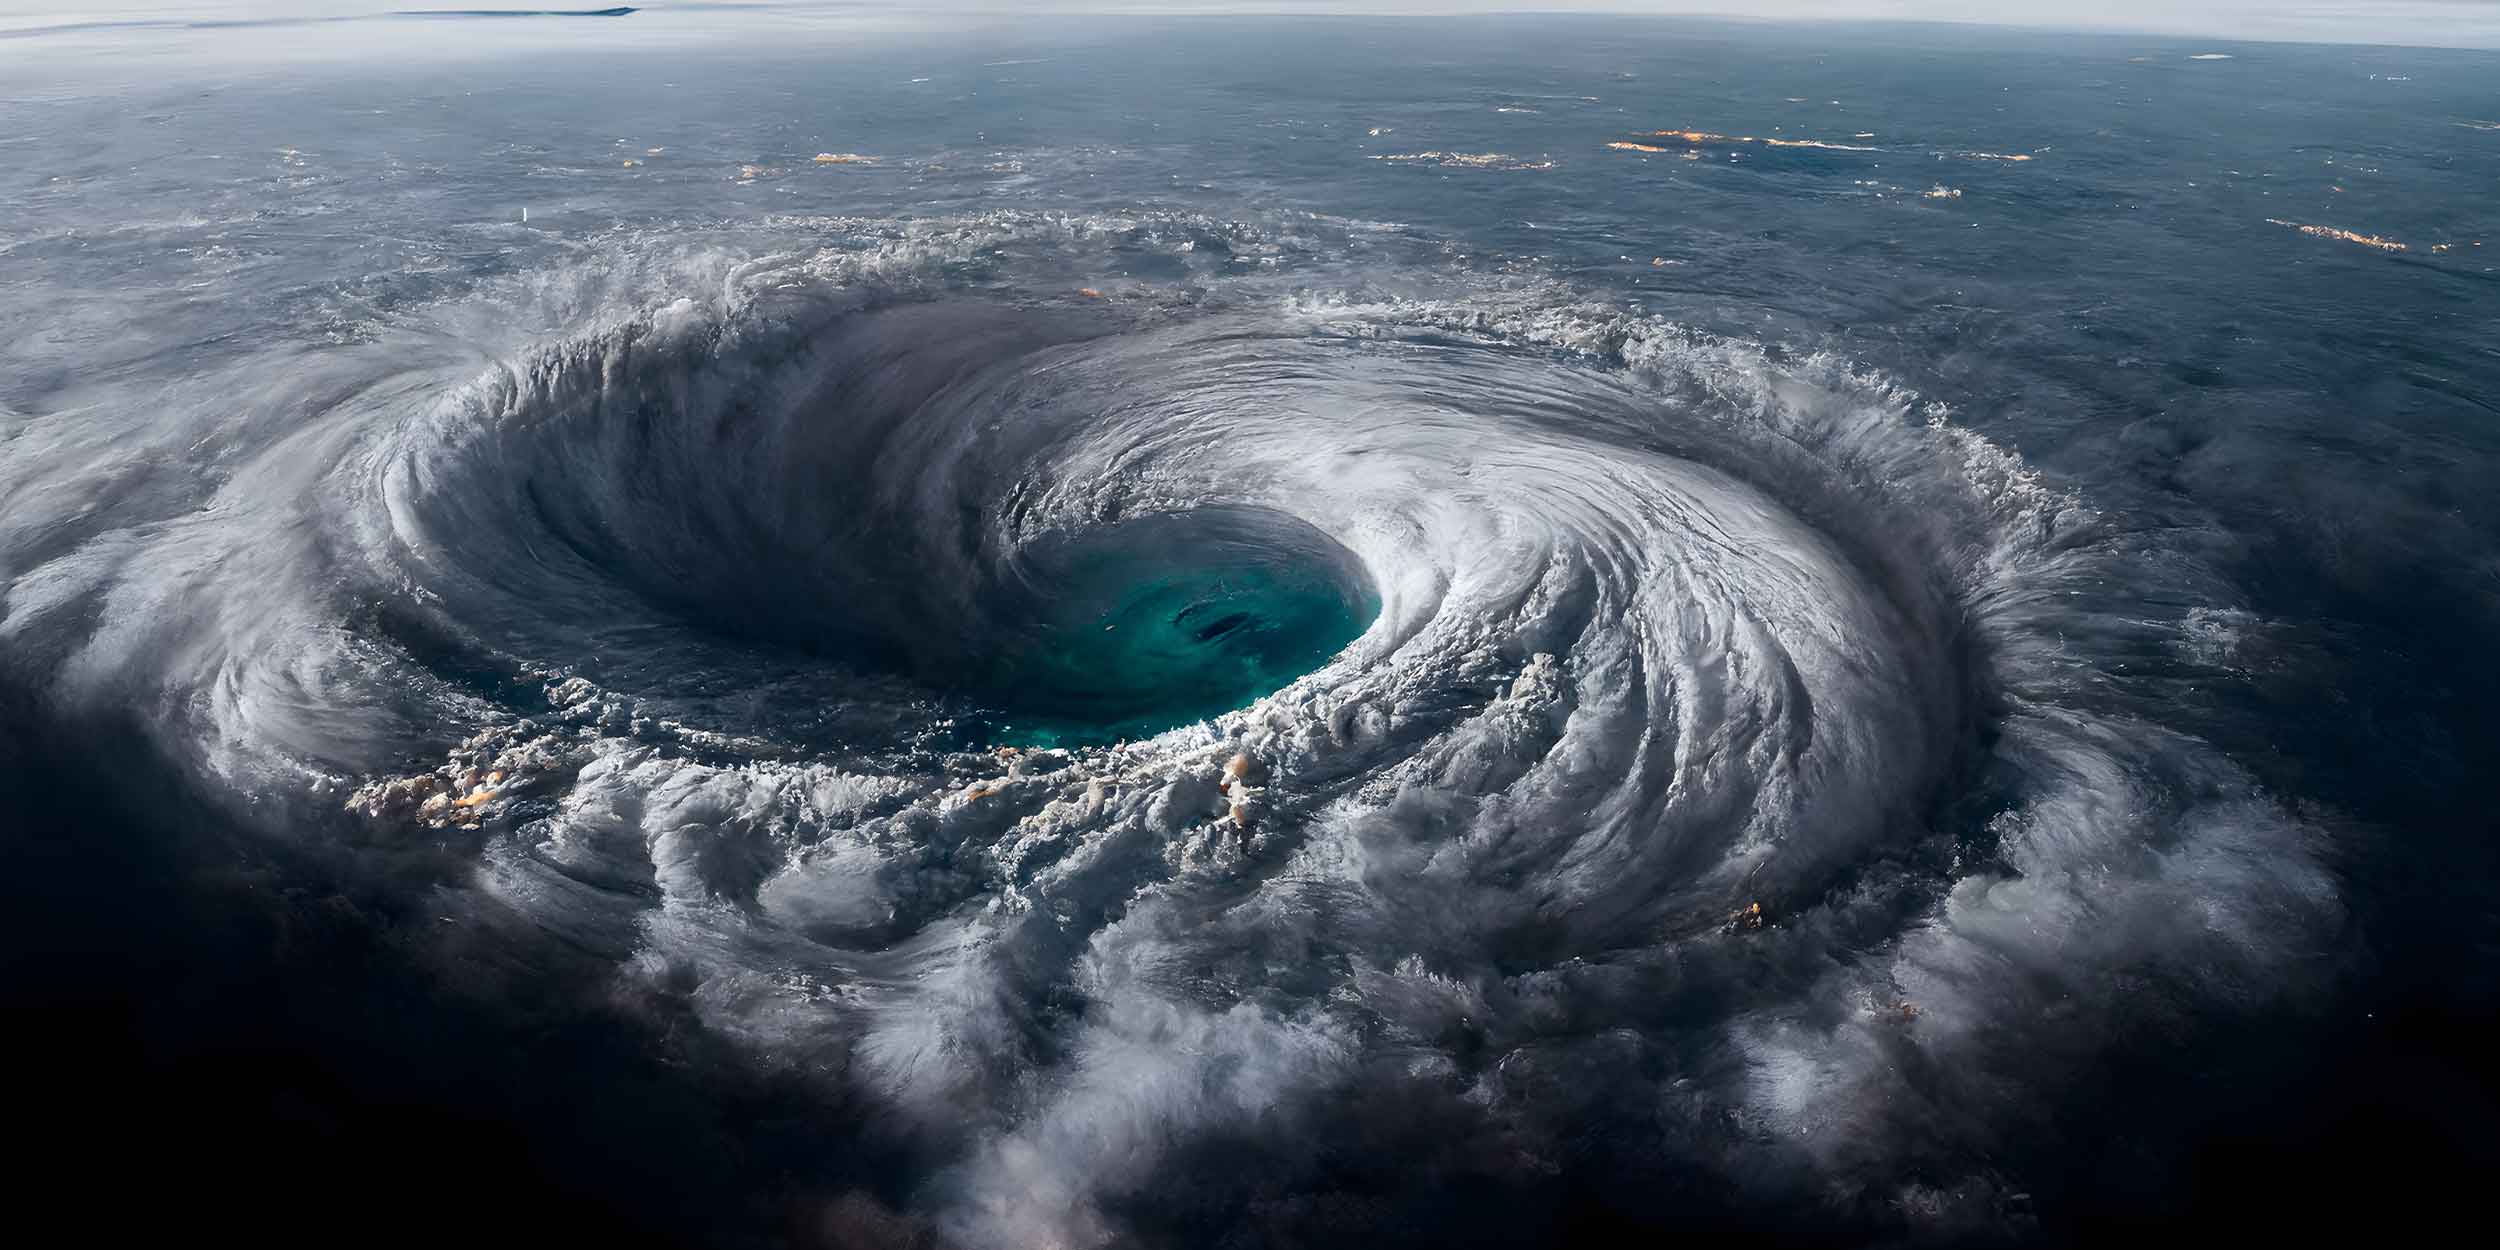 Hurricanes, typhoons, and cyclones: Earth's tropical windstorms